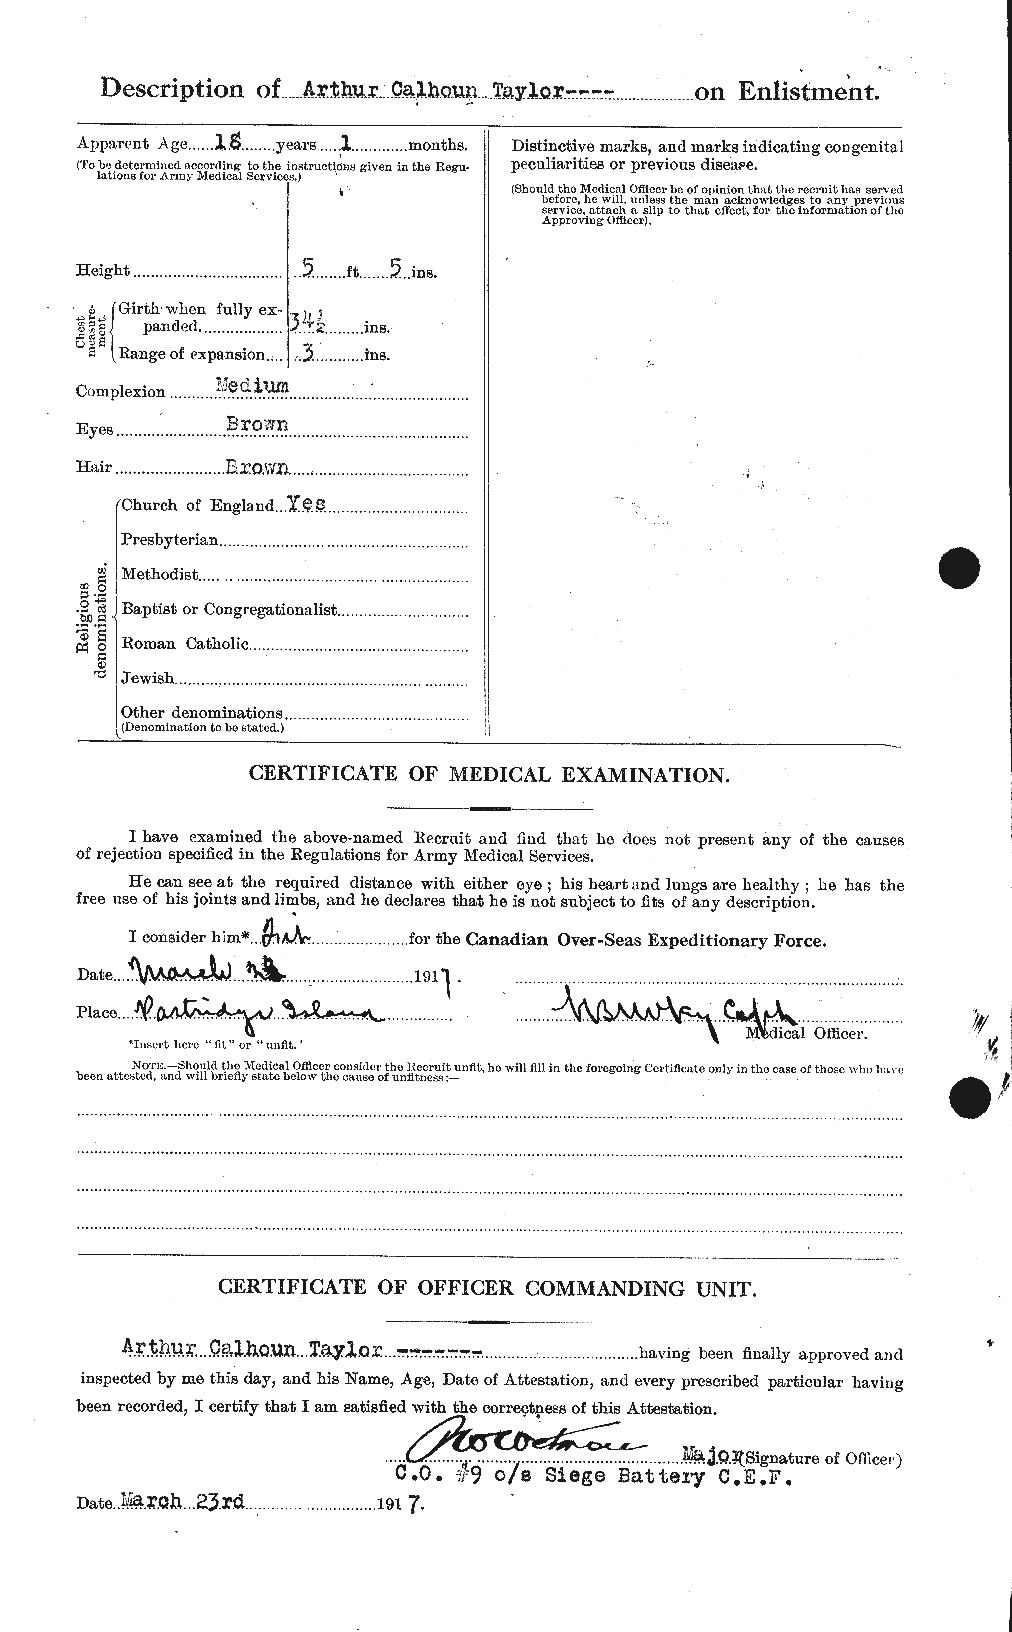 Personnel Records of the First World War - CEF 626717b